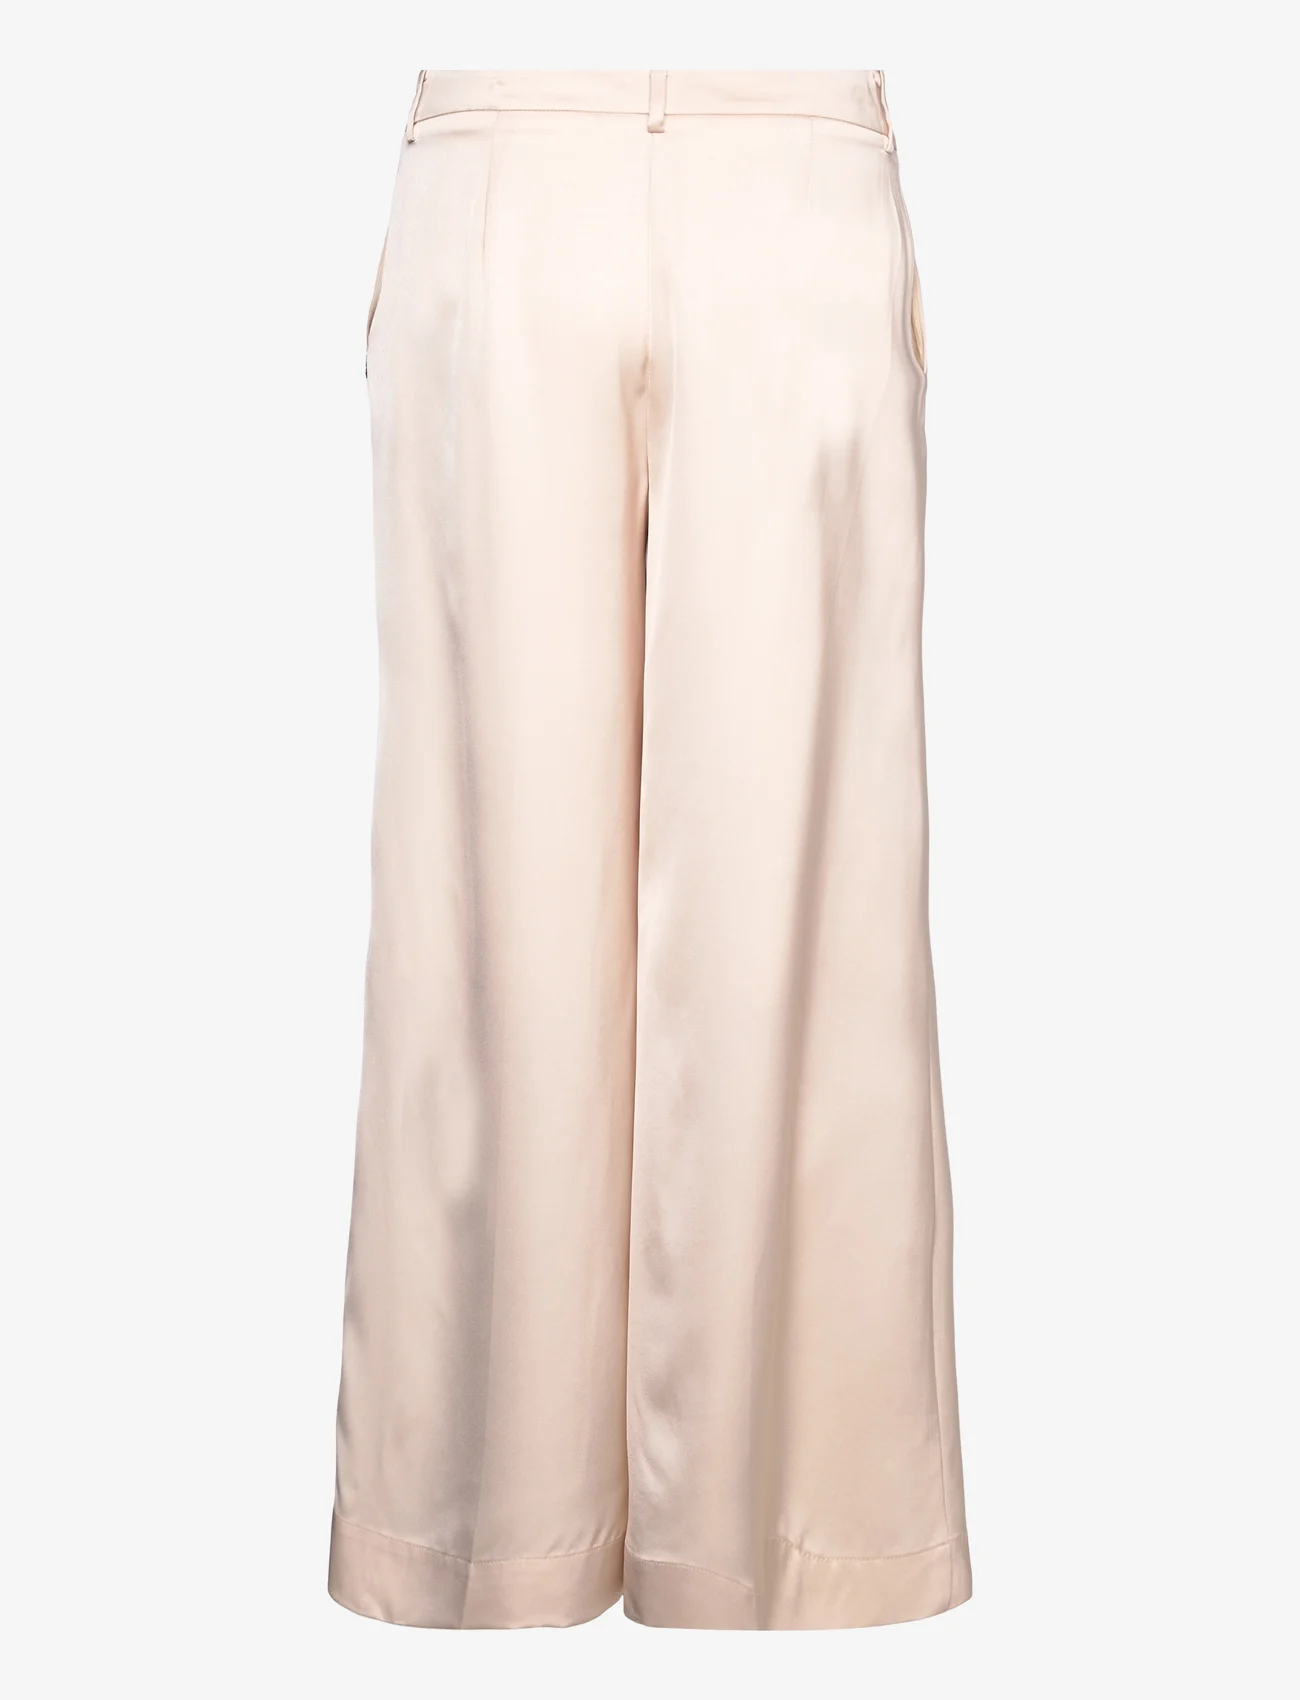 Coster Copenhagen - Pants with vide legs and press fold - peoriided outlet-hindadega - light champagne - 1